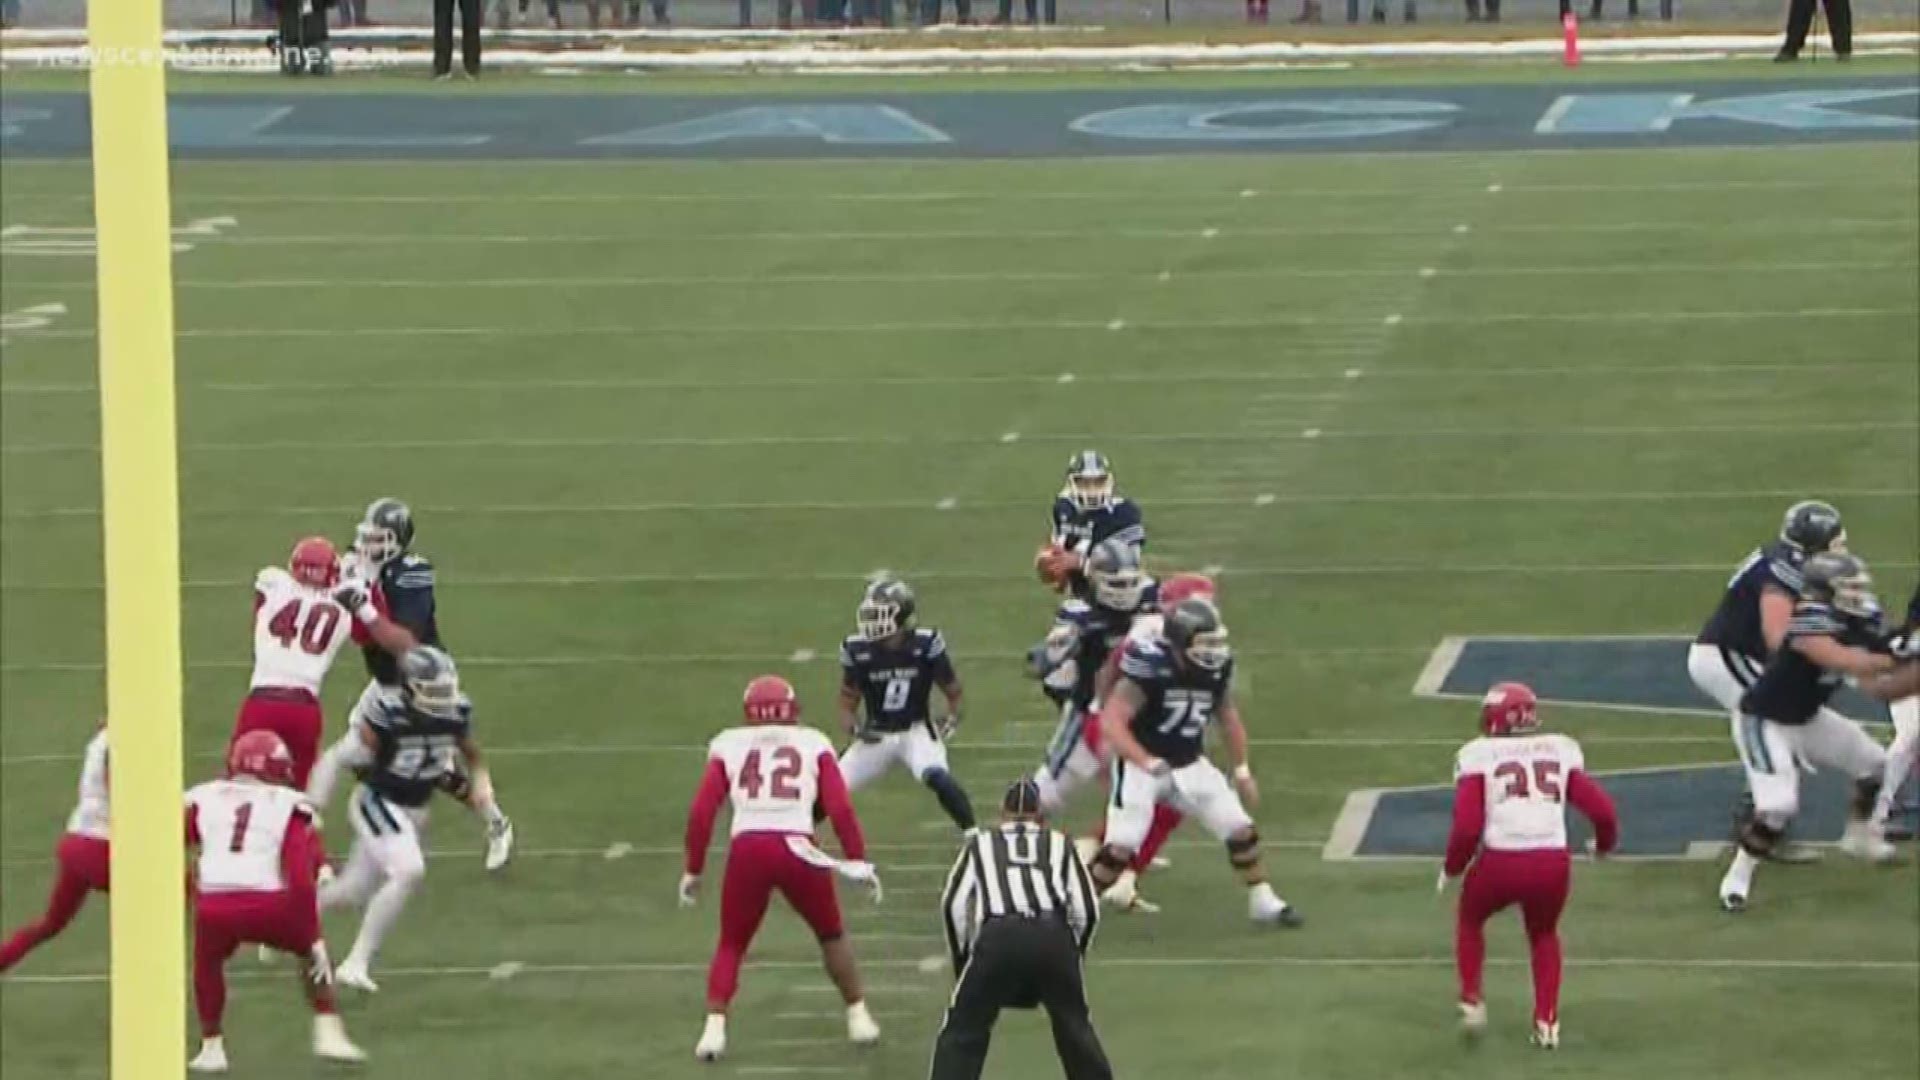 UMaine wins first home playoff game